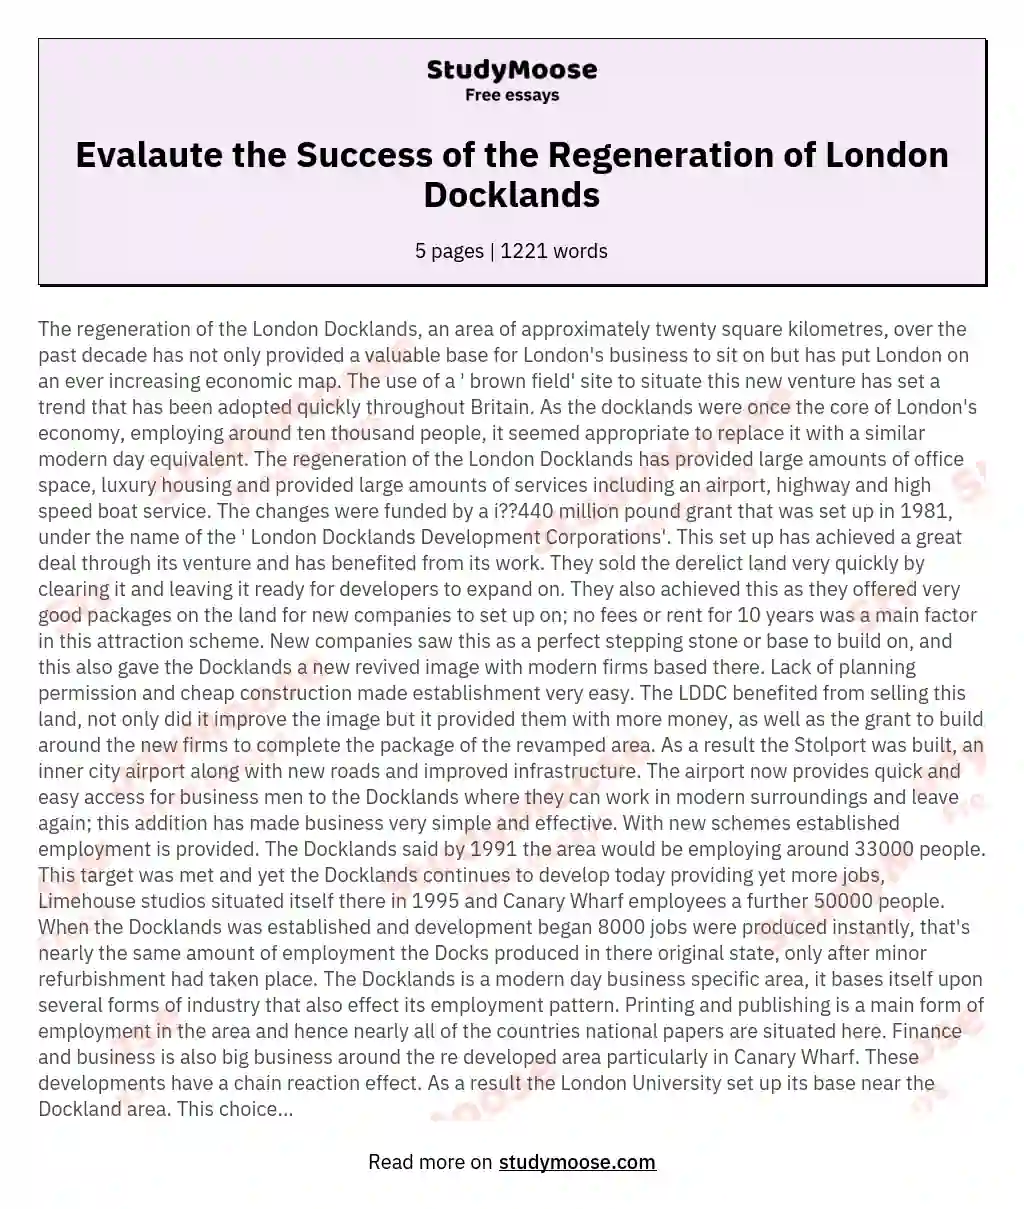 Evalaute the Success of the Regeneration of London Docklands